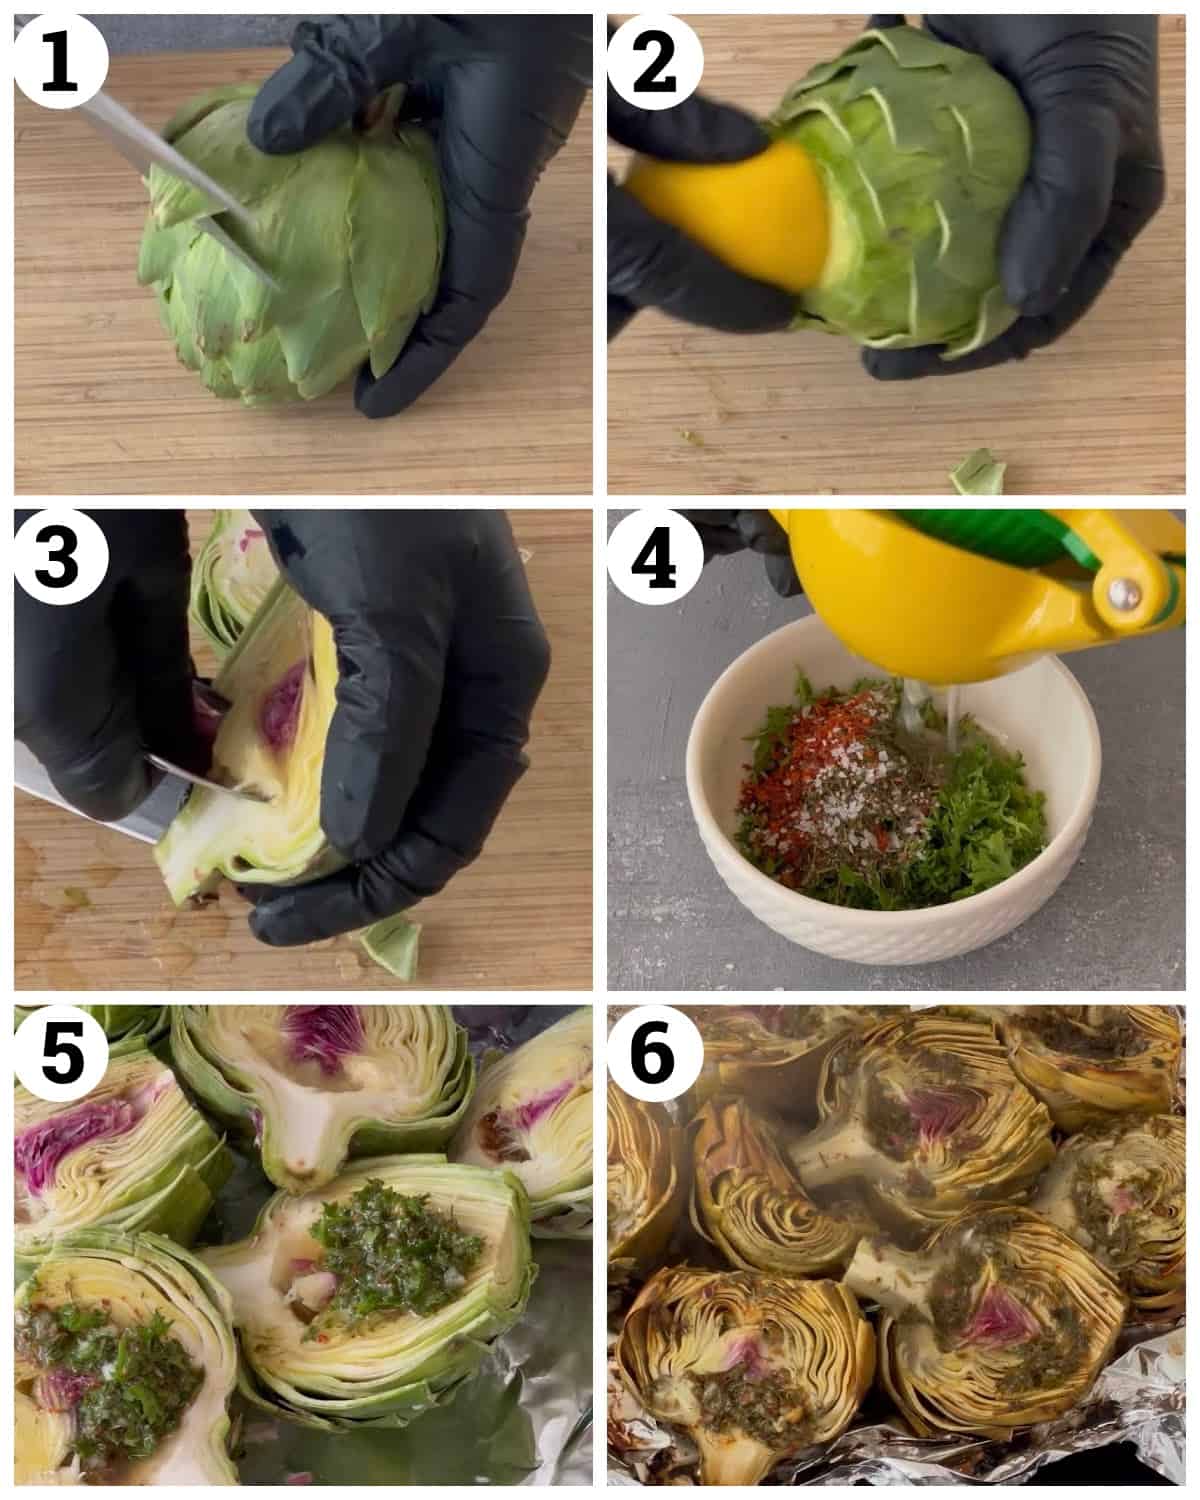 Slice the artichoke then rub with lemon and cut in half. Remove the choke and marinate then roast in the oven. 